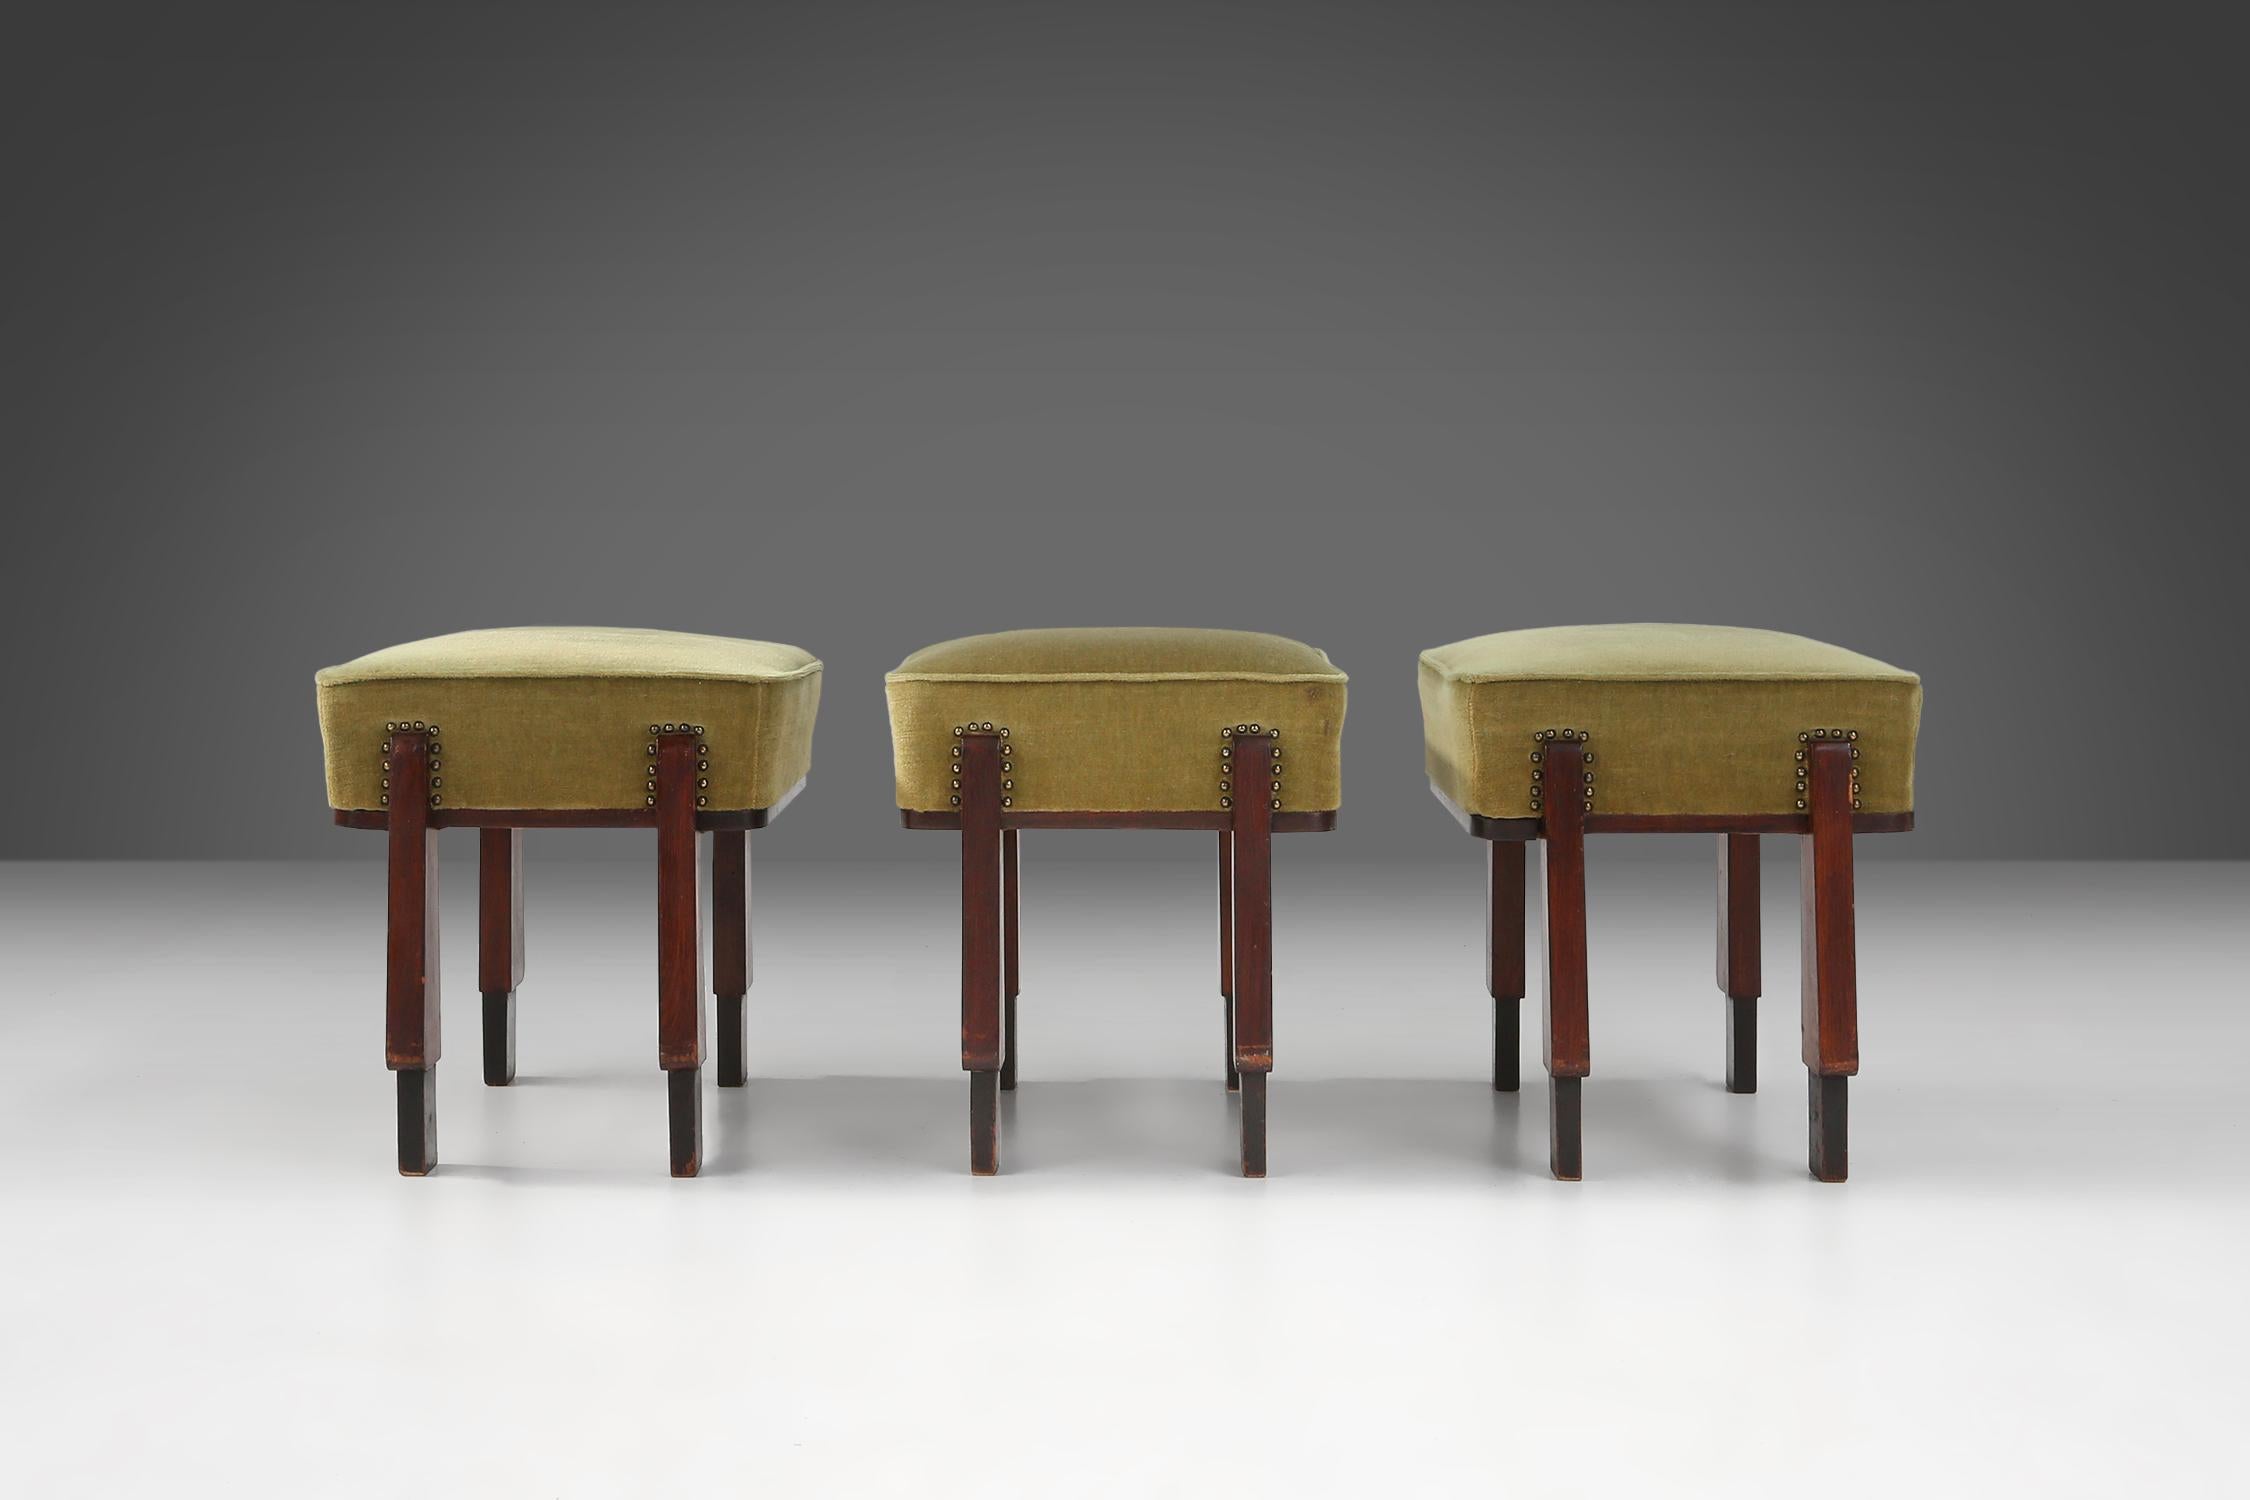 Elegant art deco stool /pouf with green upholstery (3 pieces), France 1930s For Sale 4